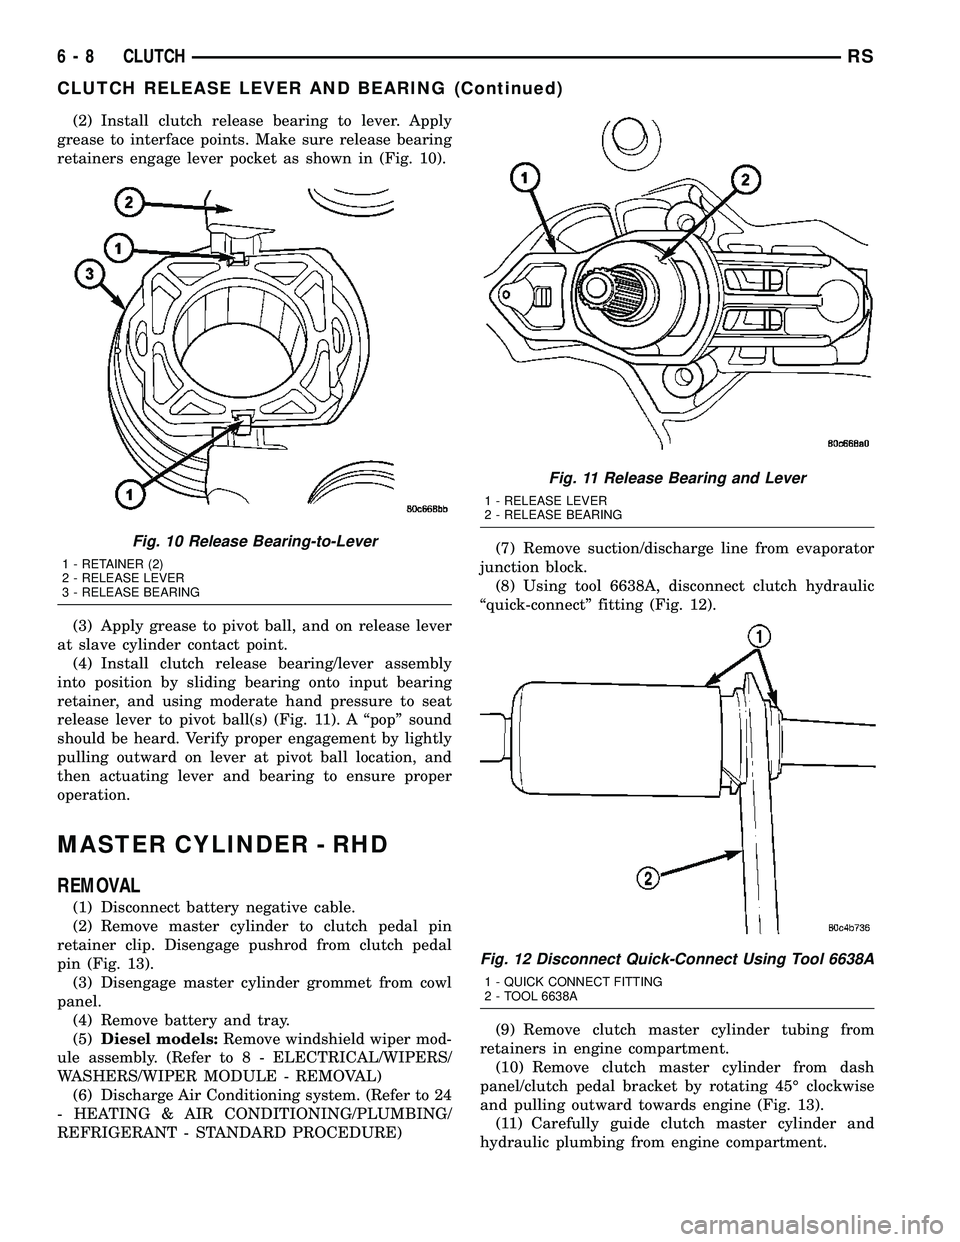 DODGE TOWN AND COUNTRY 2004  Service Manual (2) Install clutch release bearing to lever. Apply
grease to interface points. Make sure release bearing
retainers engage lever pocket as shown in (Fig. 10).
(3) Apply grease to pivot ball, and on rel